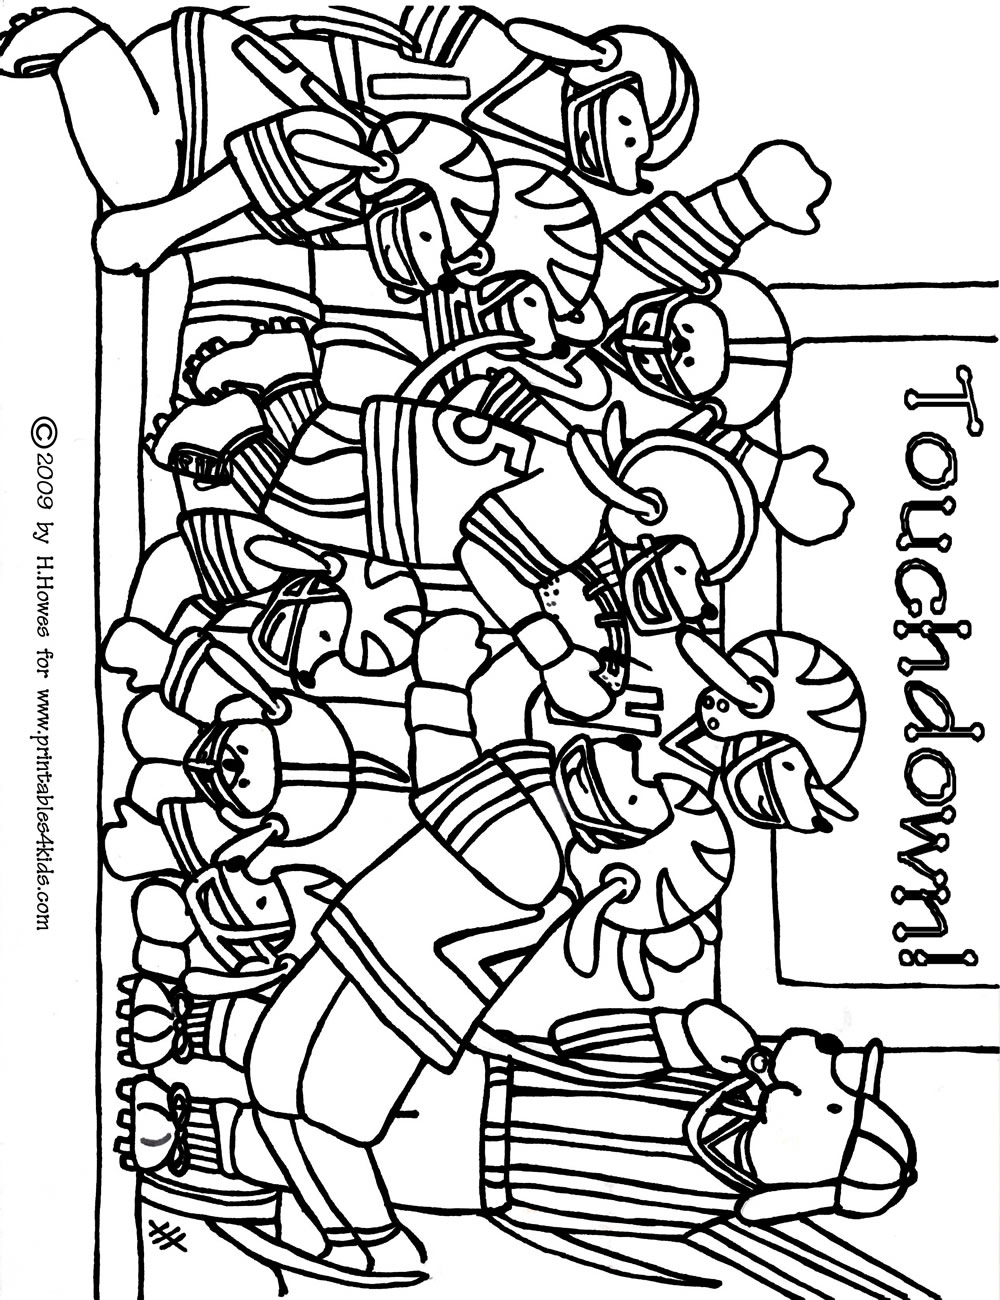 football games coloring page - faladicu23's soup